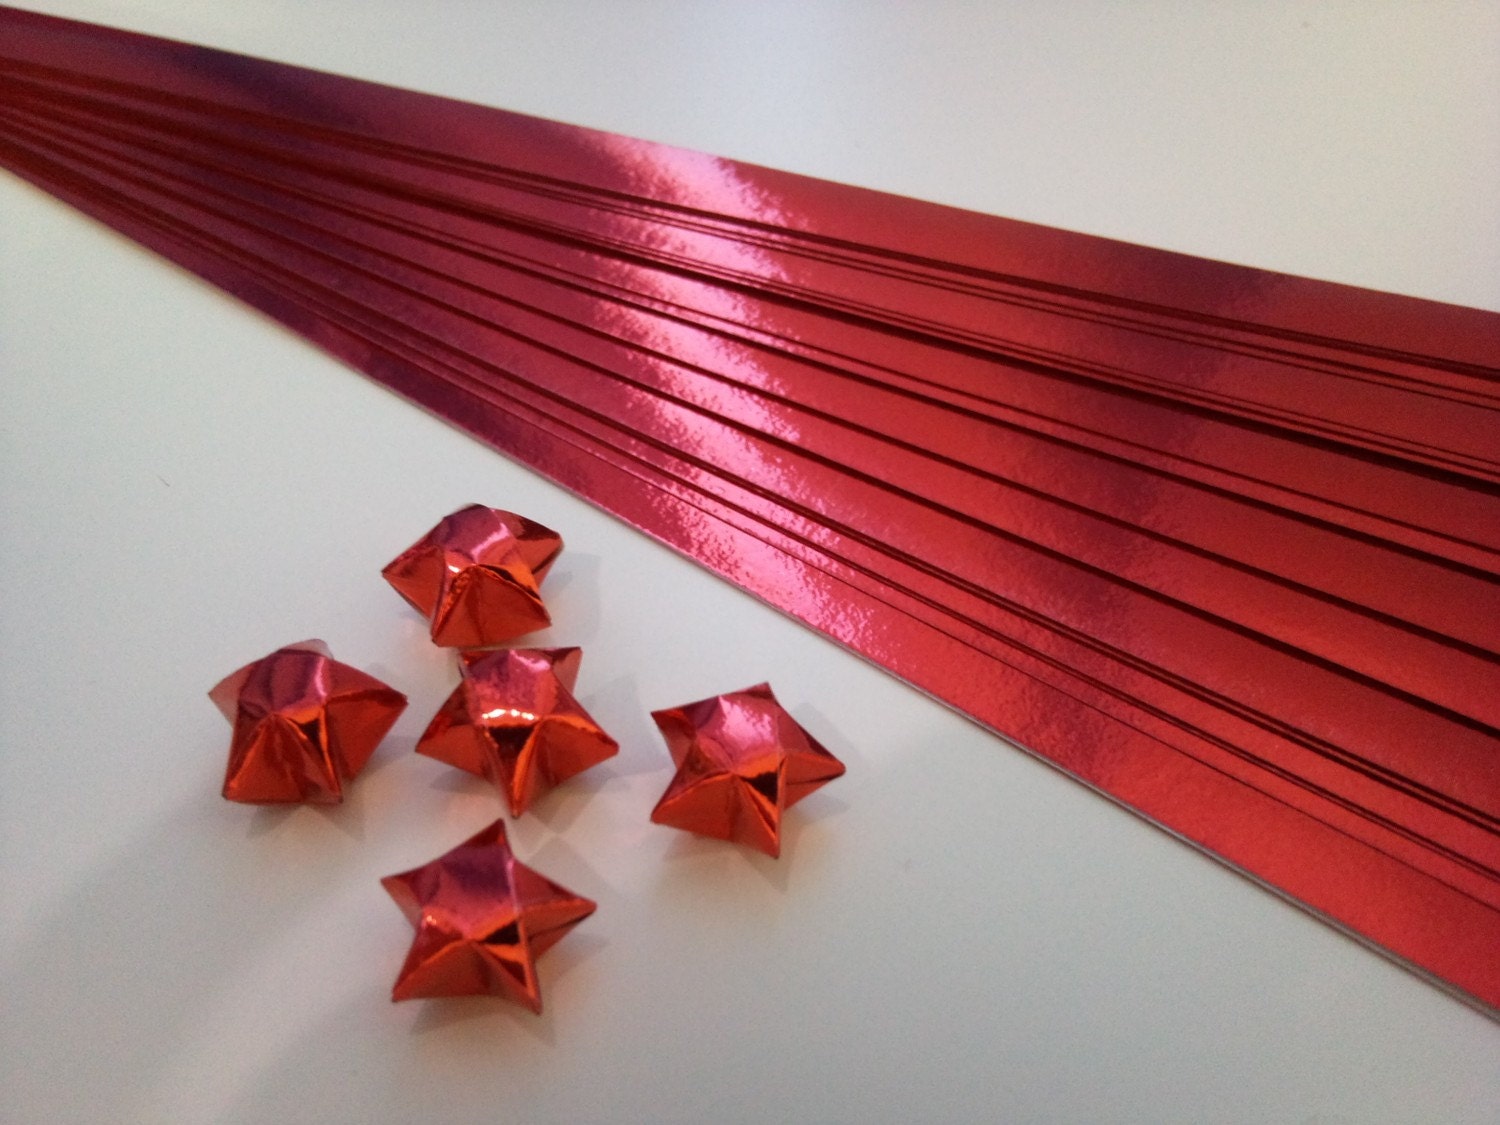 100 Origami Lucky Star Paper Strips Shinny Ruby by littlegestures